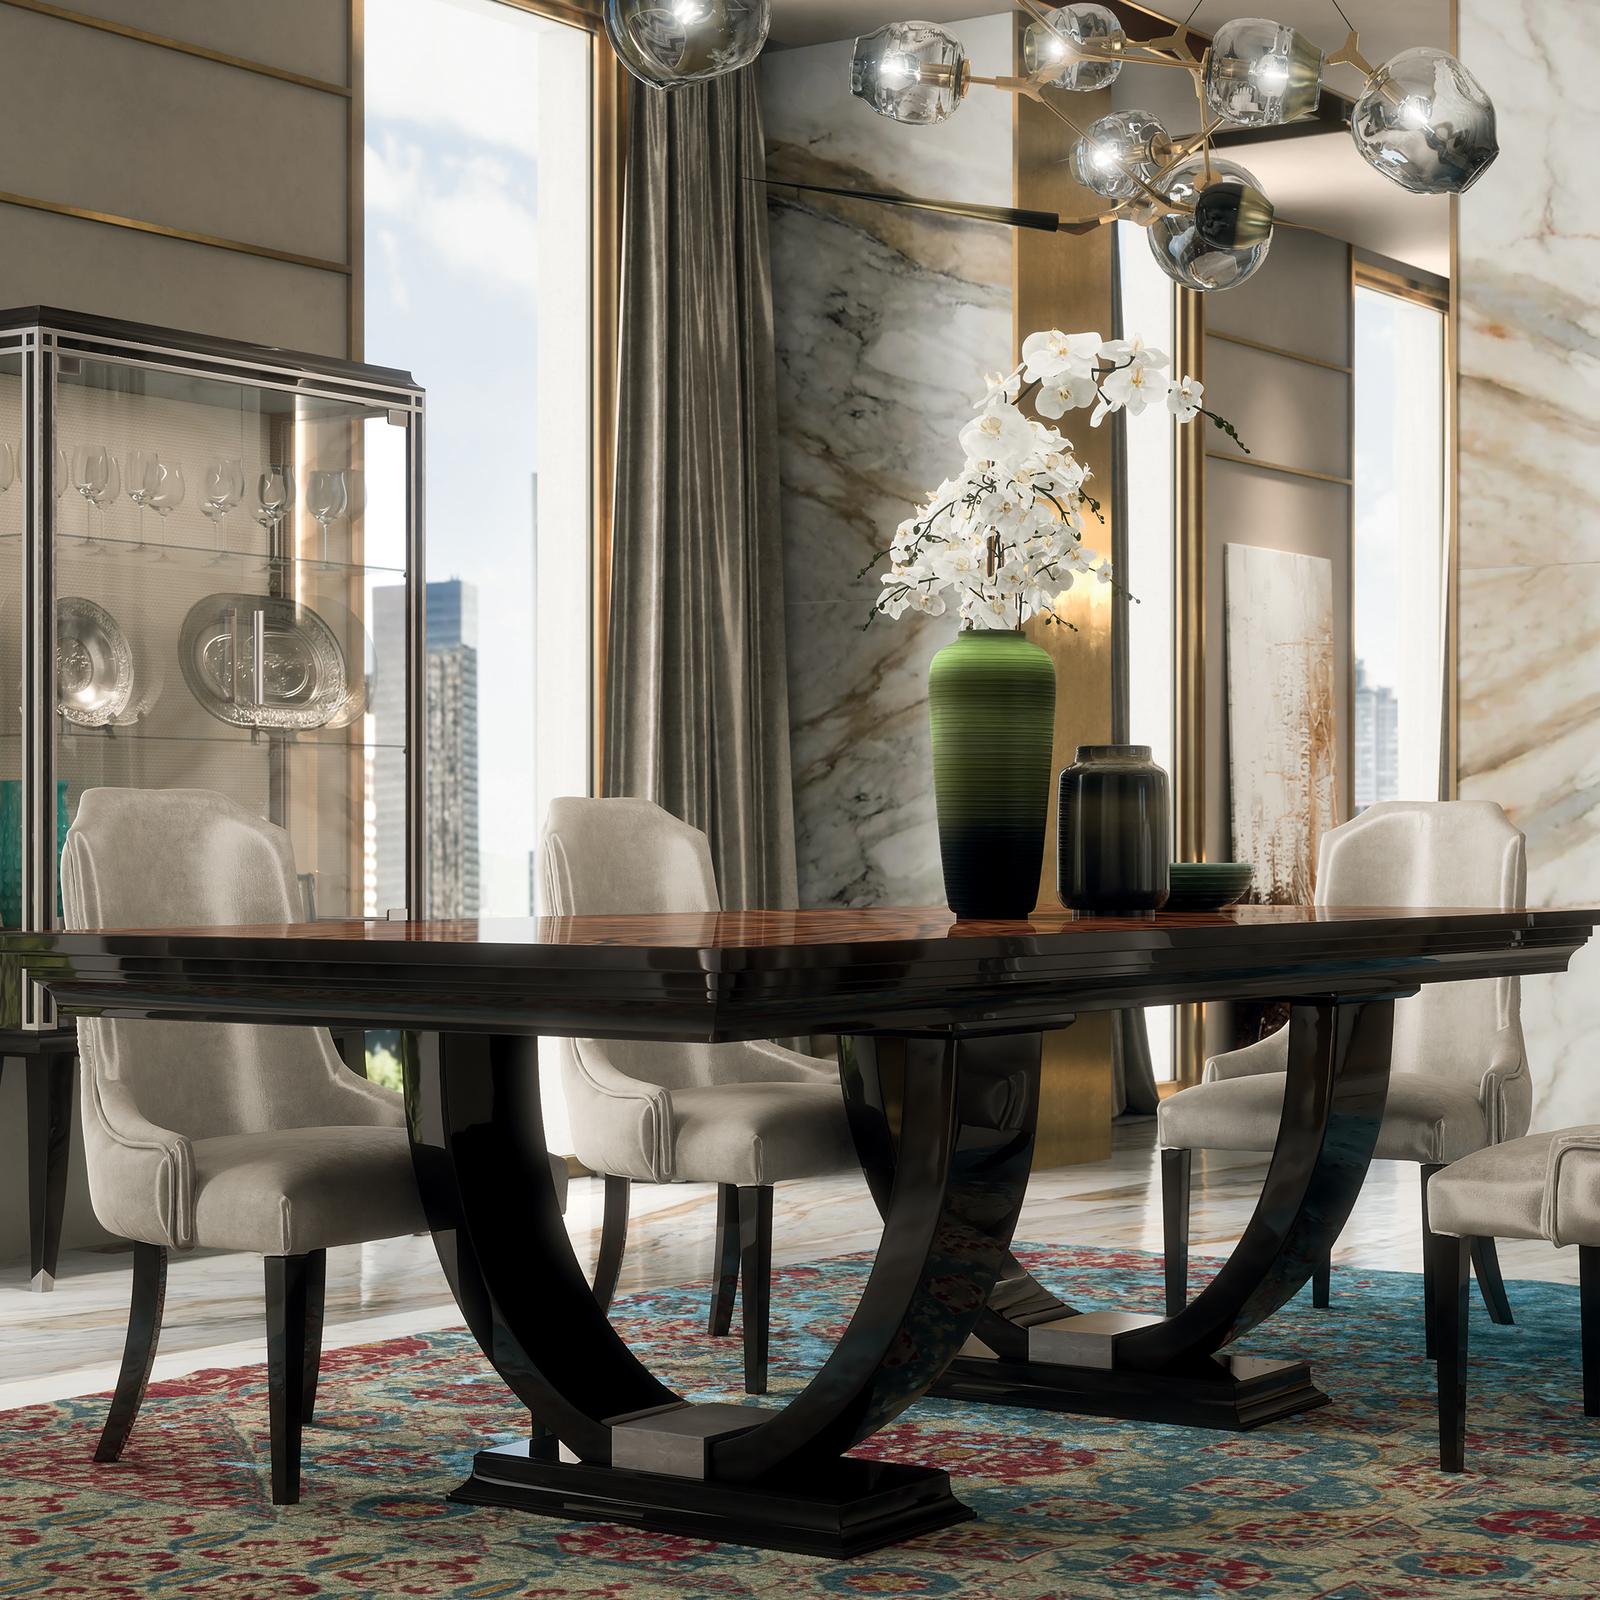 The attractive design of the new Oscar collection adapts to settings with an exquisitely contemporary and cosmopolitan flavor. This rectangular table has a sturdy structure and features a splendid polished finish and silver leaf detail on the